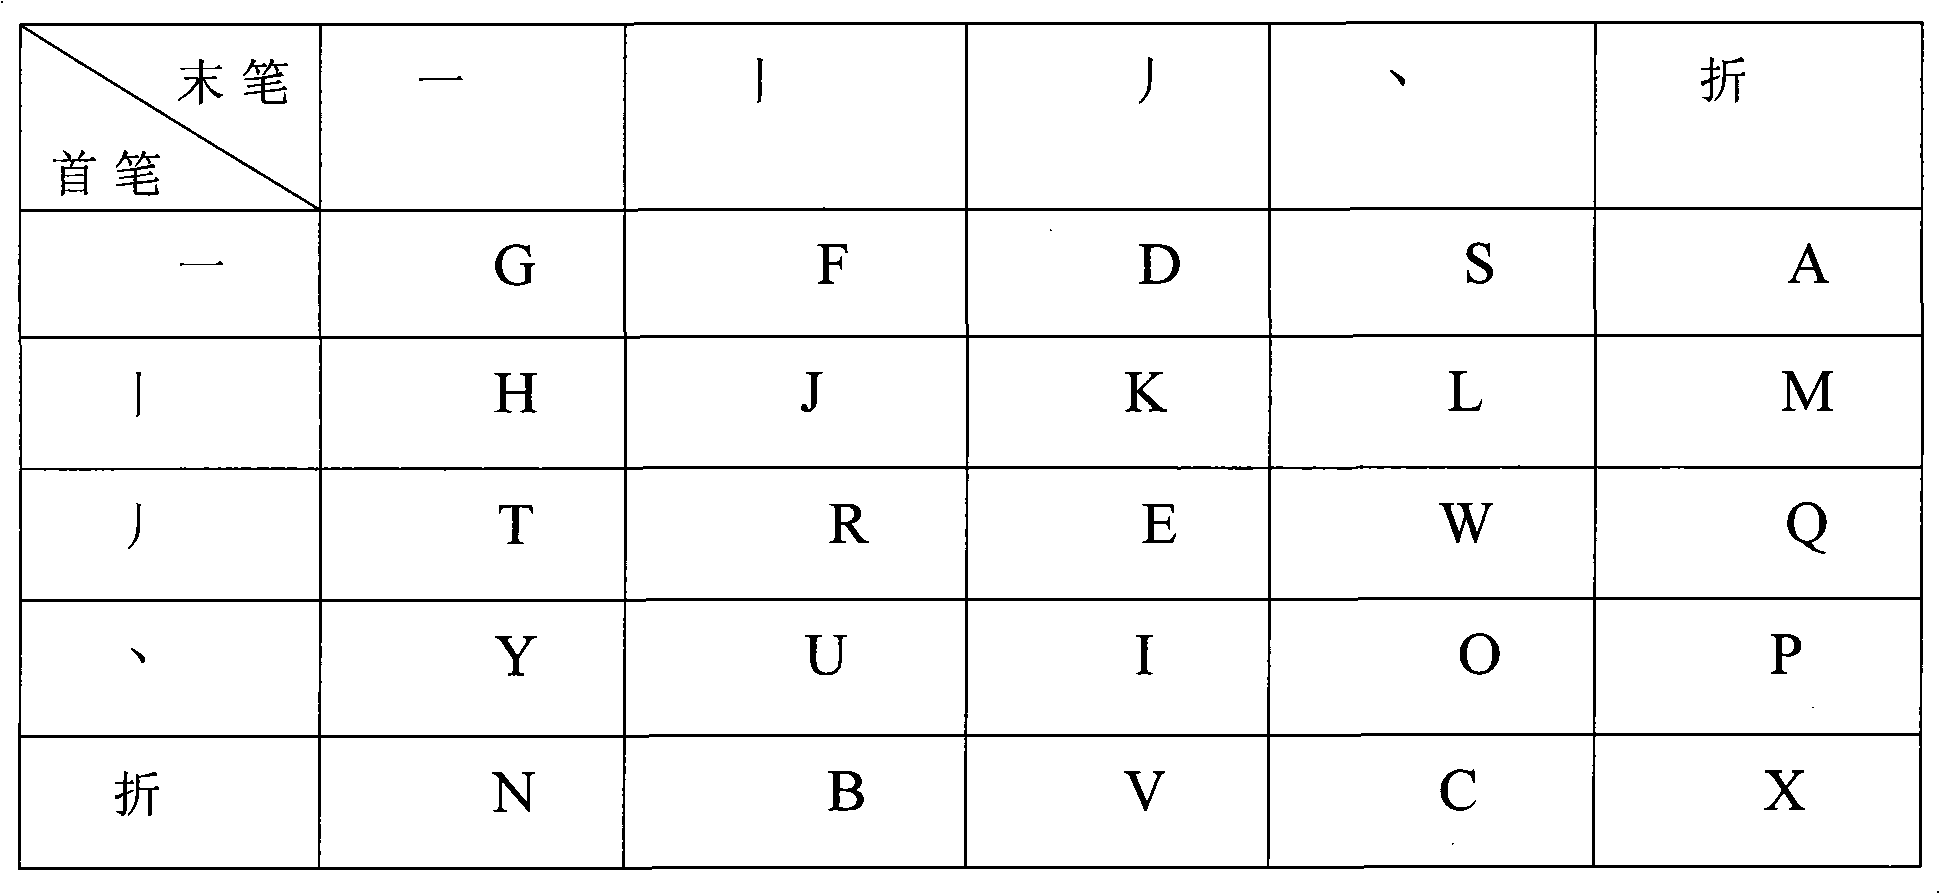 Method for inputting Chinese character with sound and tone definition by using simplified pinyin